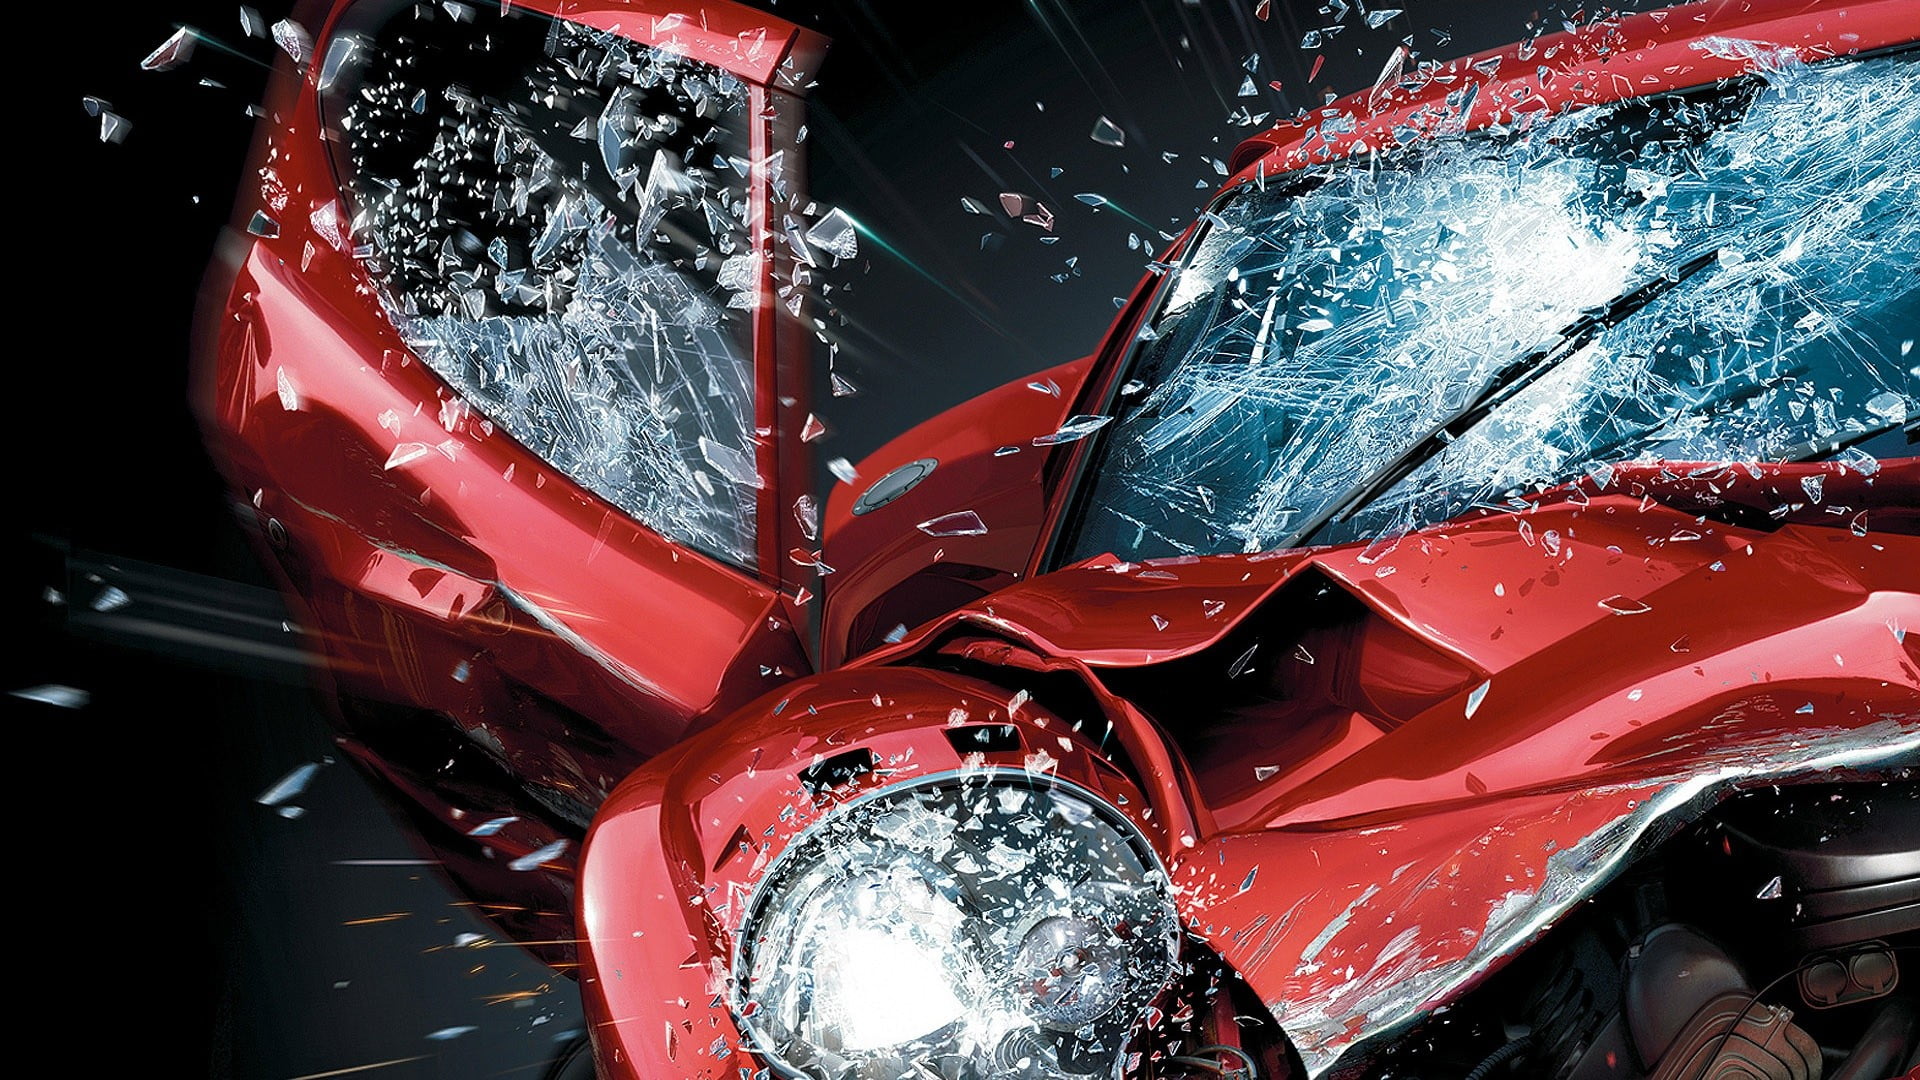 wrecked red vehicle with cracked windshield, car, video games